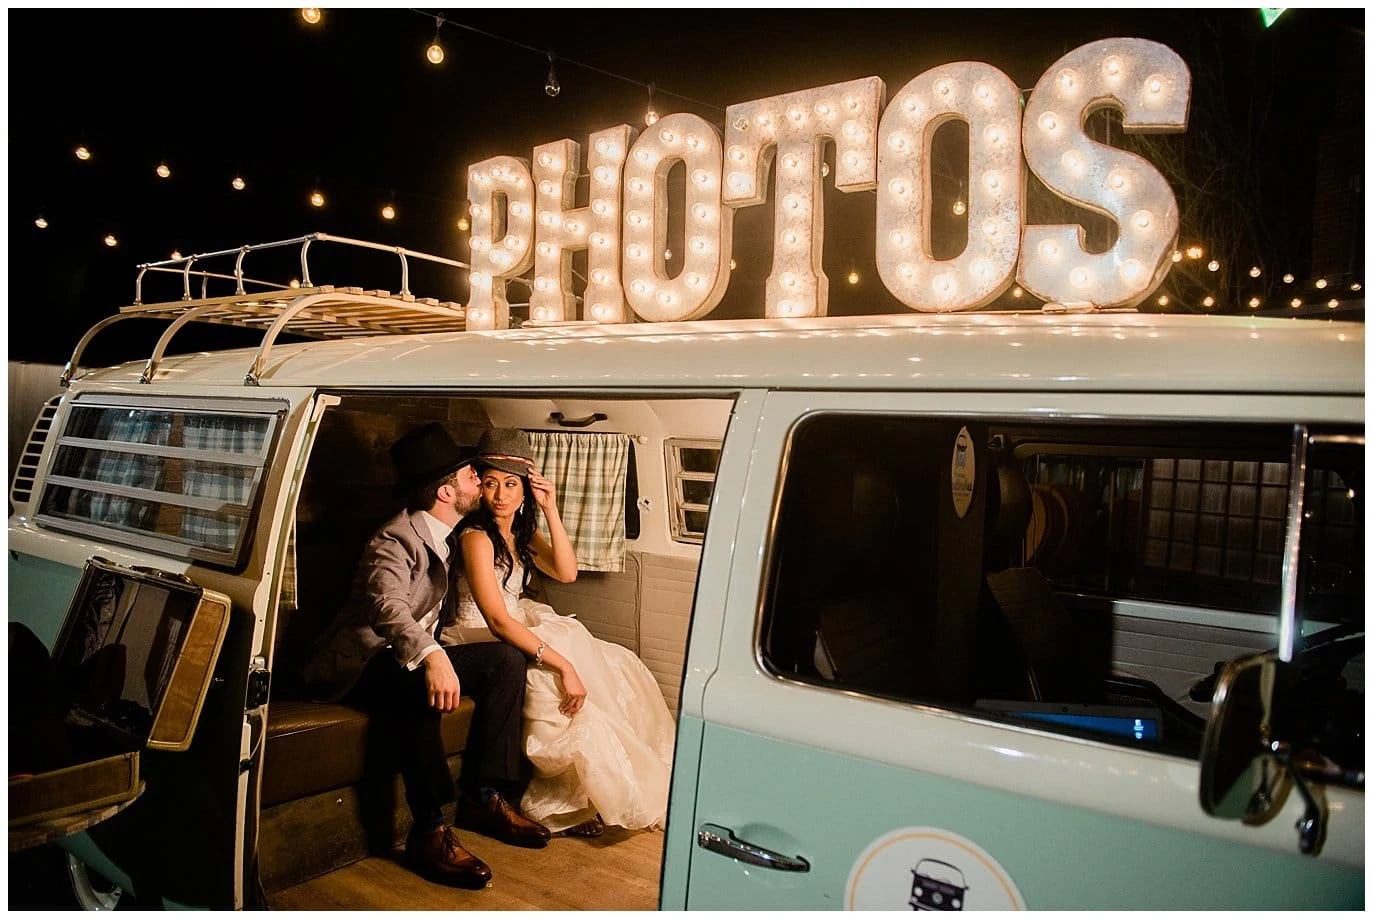 wedding couple in photo booth bus by Blanc Wedding Photographer Jennie Crate